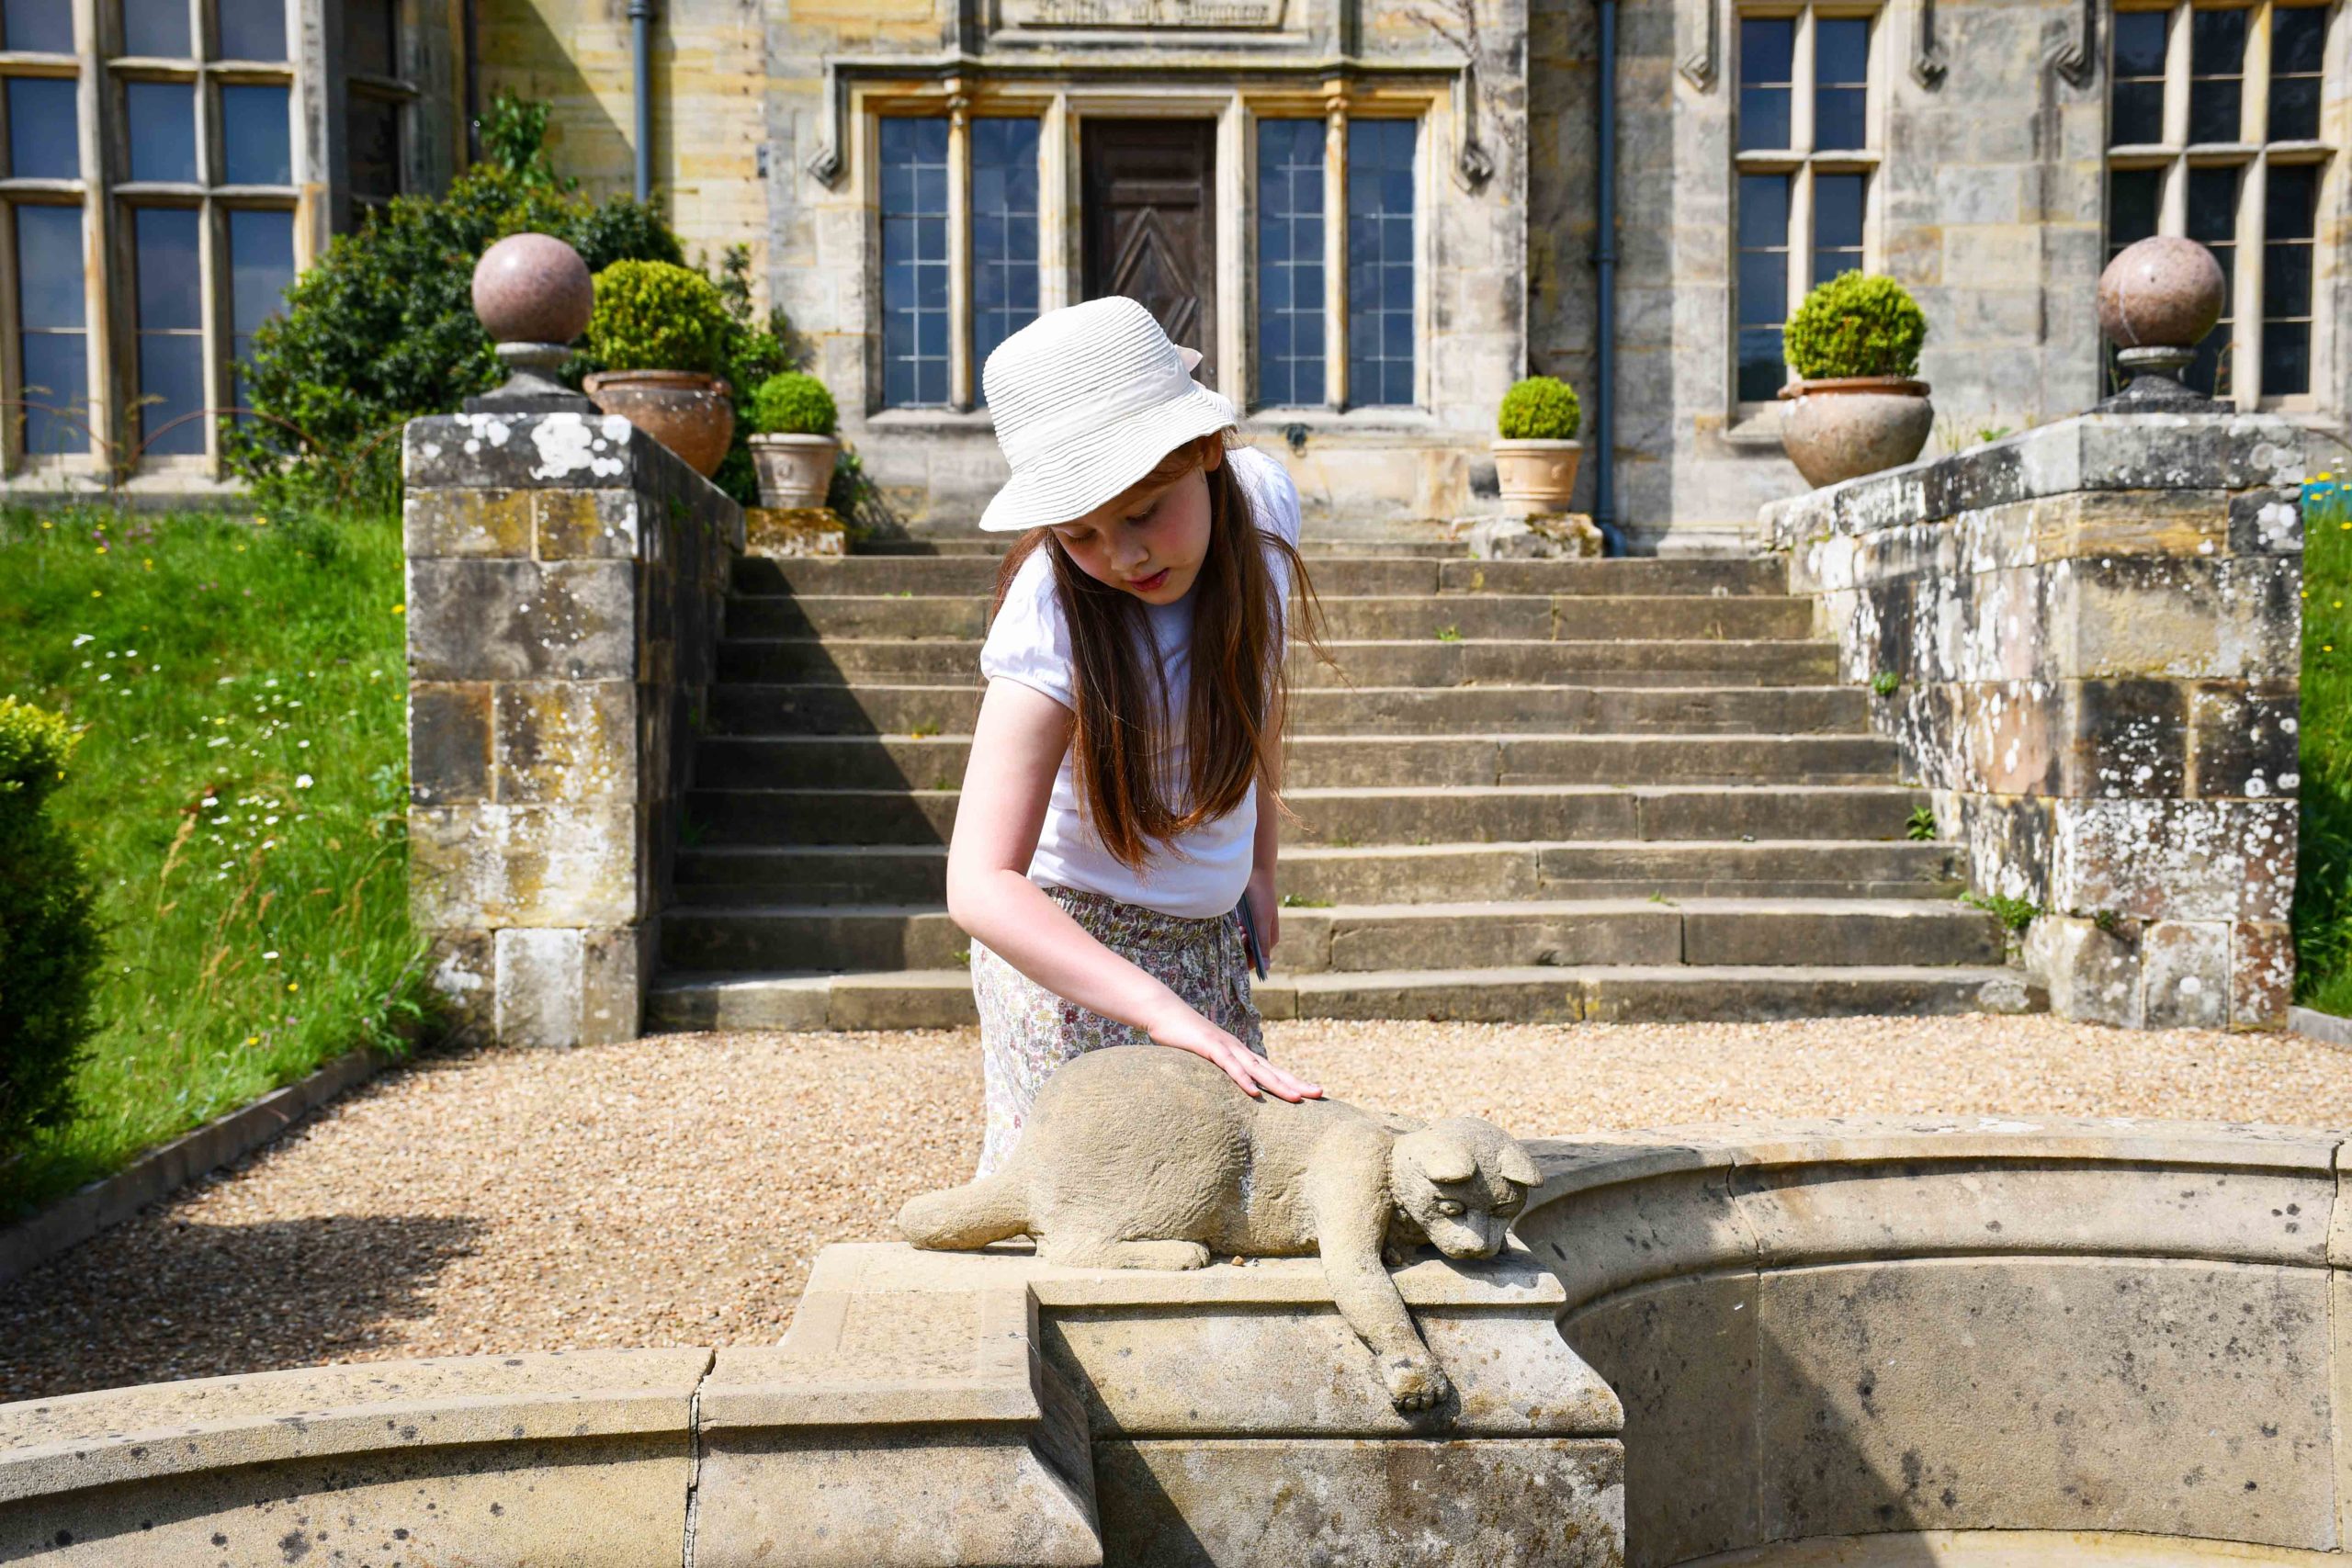 Scotney House © French Moments